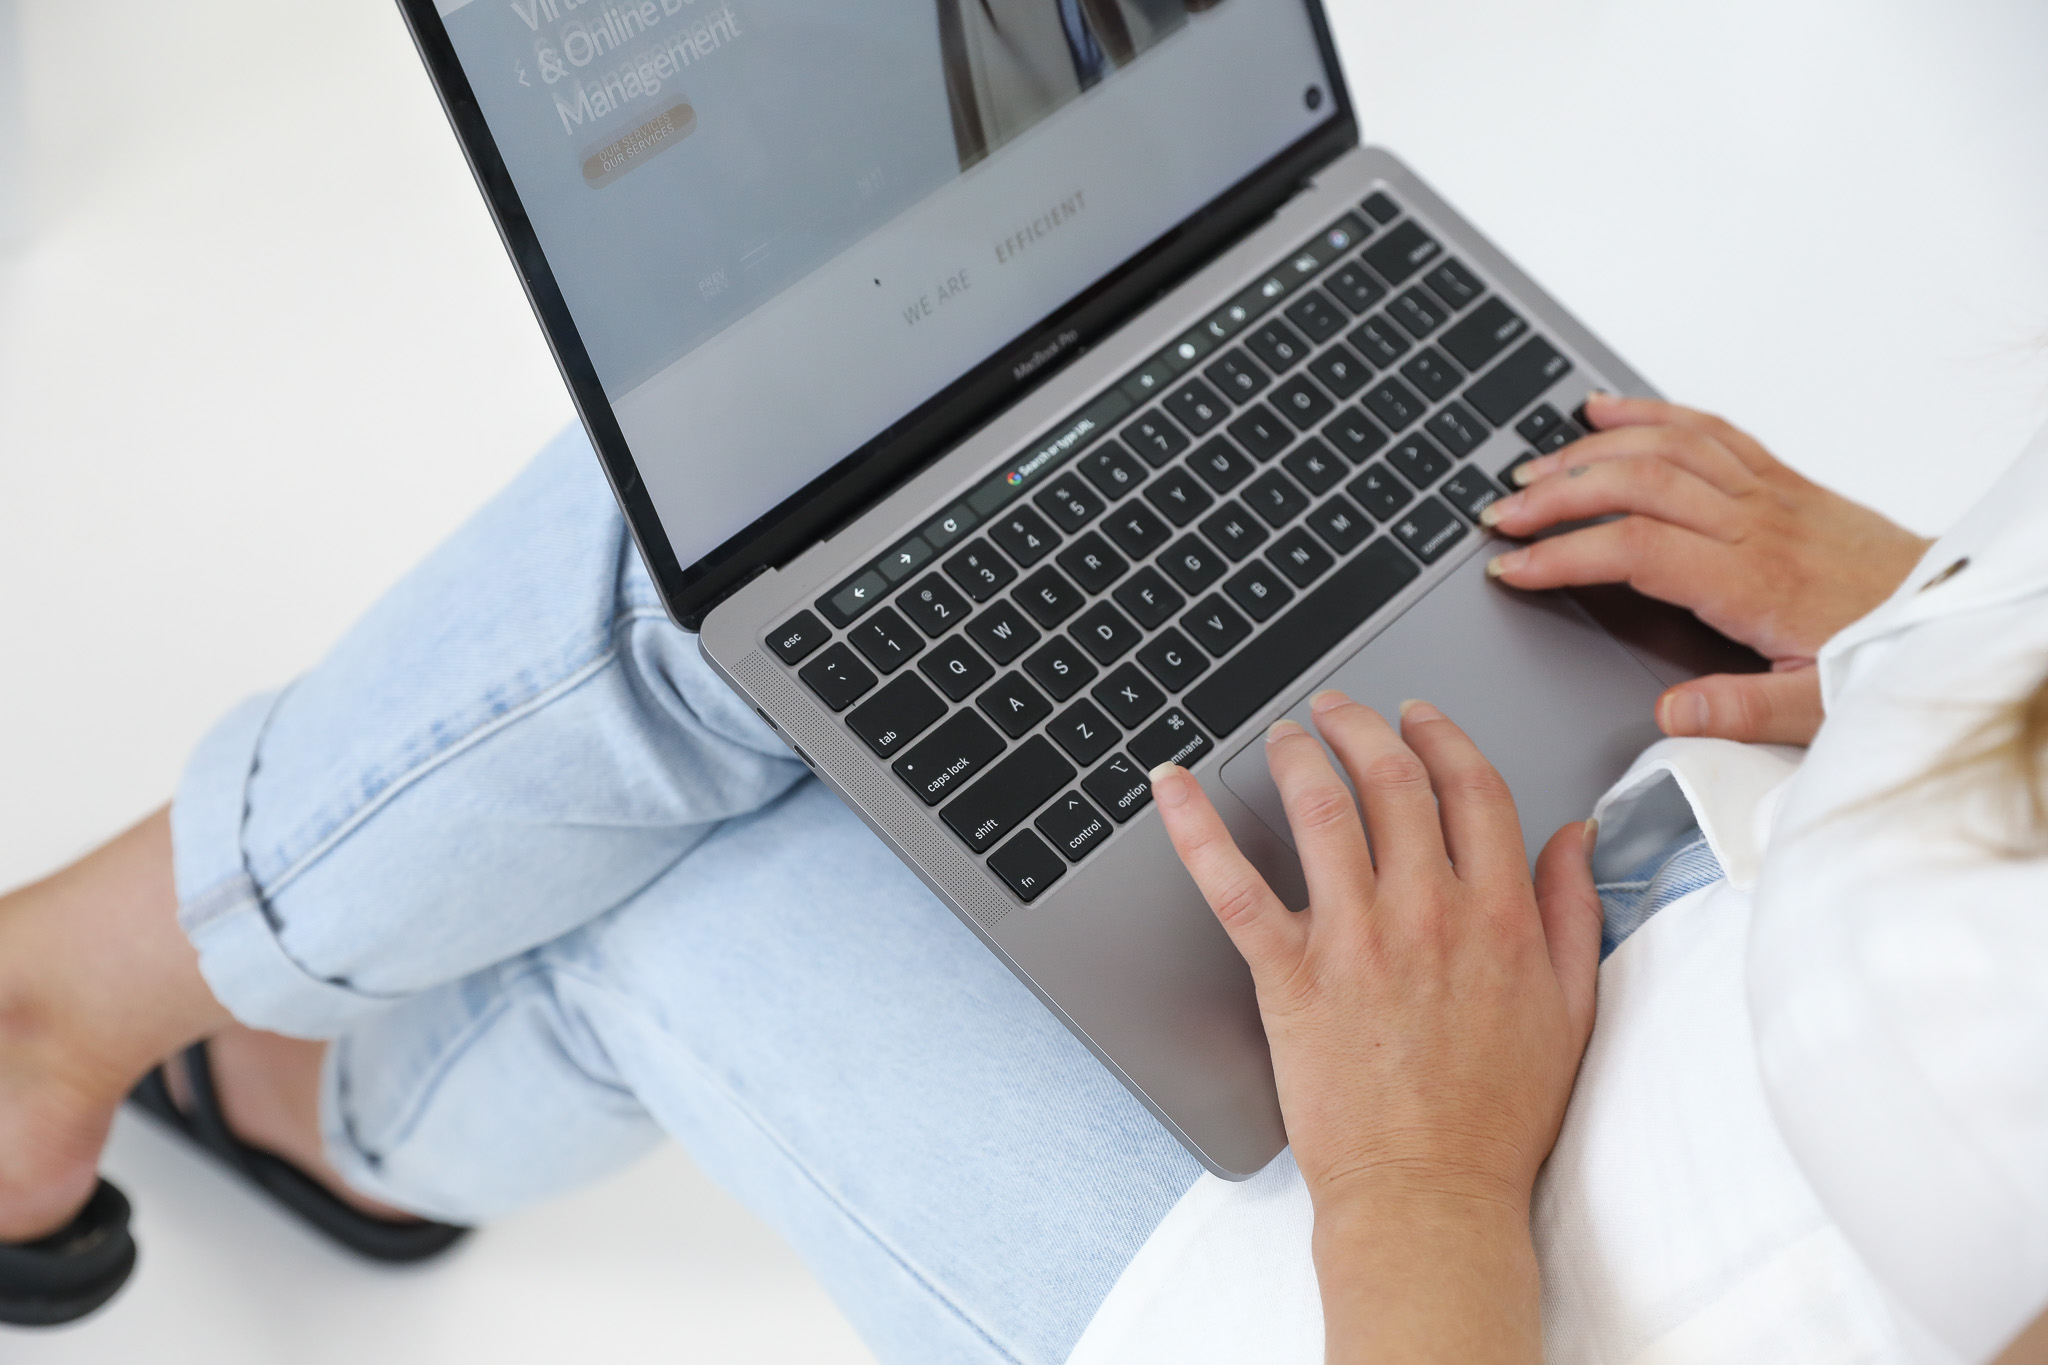 woman in white top, blue jeans and black sandals sitting cross-legged working on laptop on lap